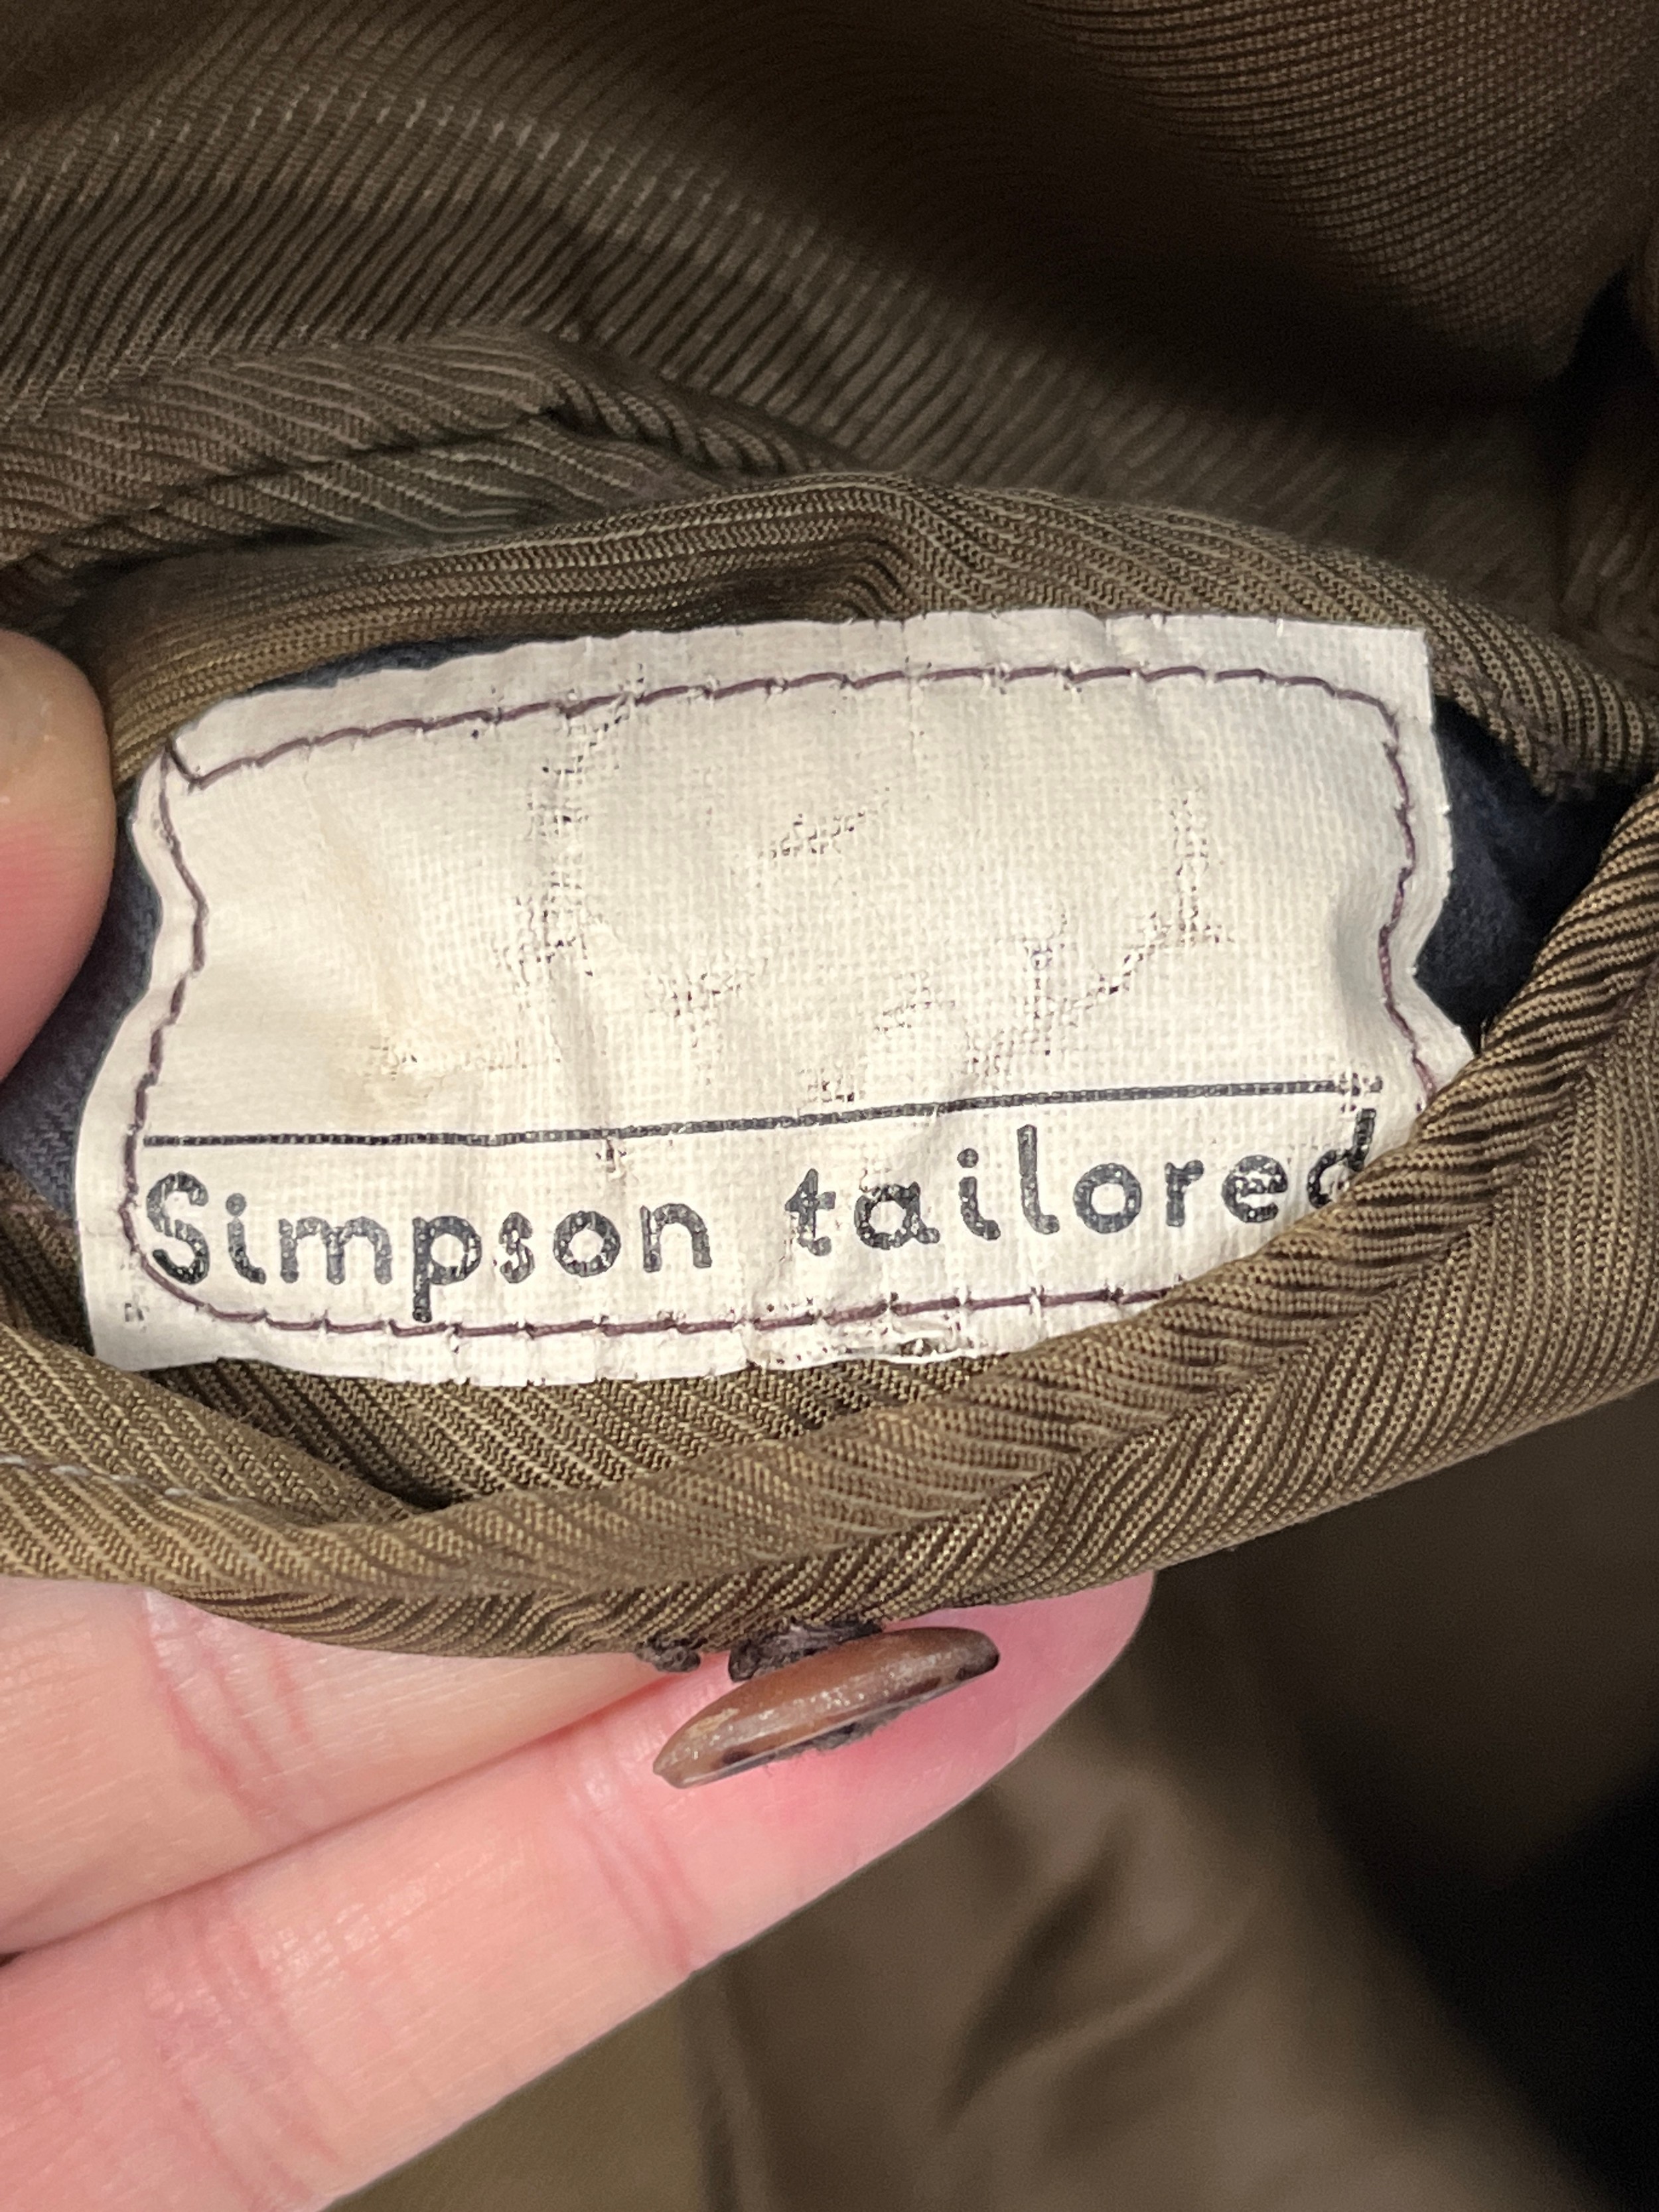 A WWII ATS uniform consisting of blouse and skirt, previously belonging to Florence Smith, who drove - Image 3 of 7